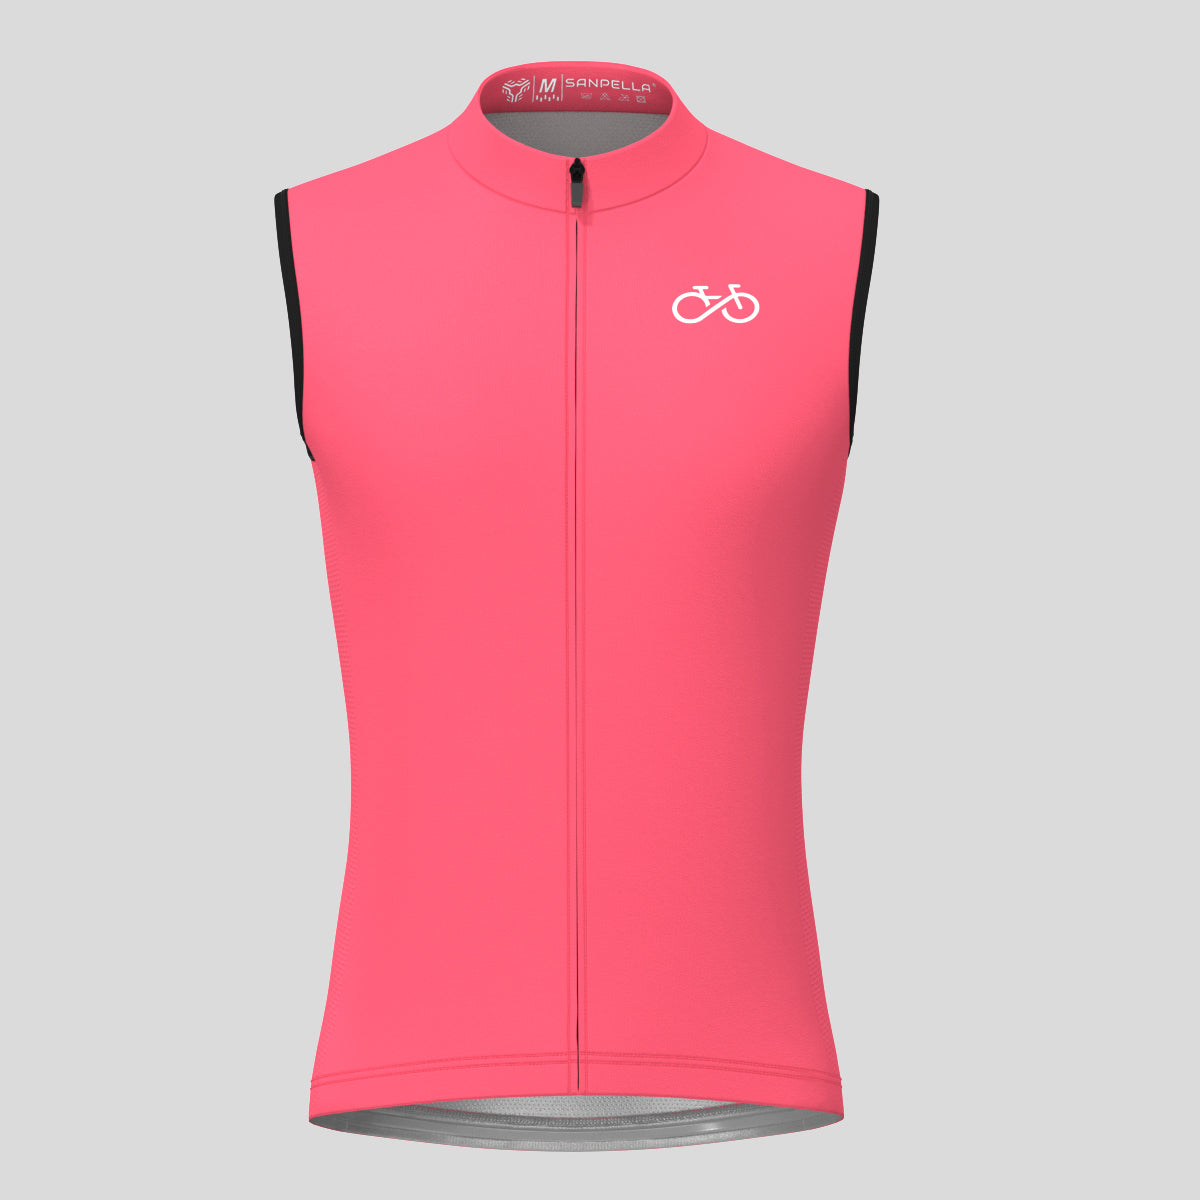 Men's Ride Forever Sleeveless Cycling Jersey - Pink